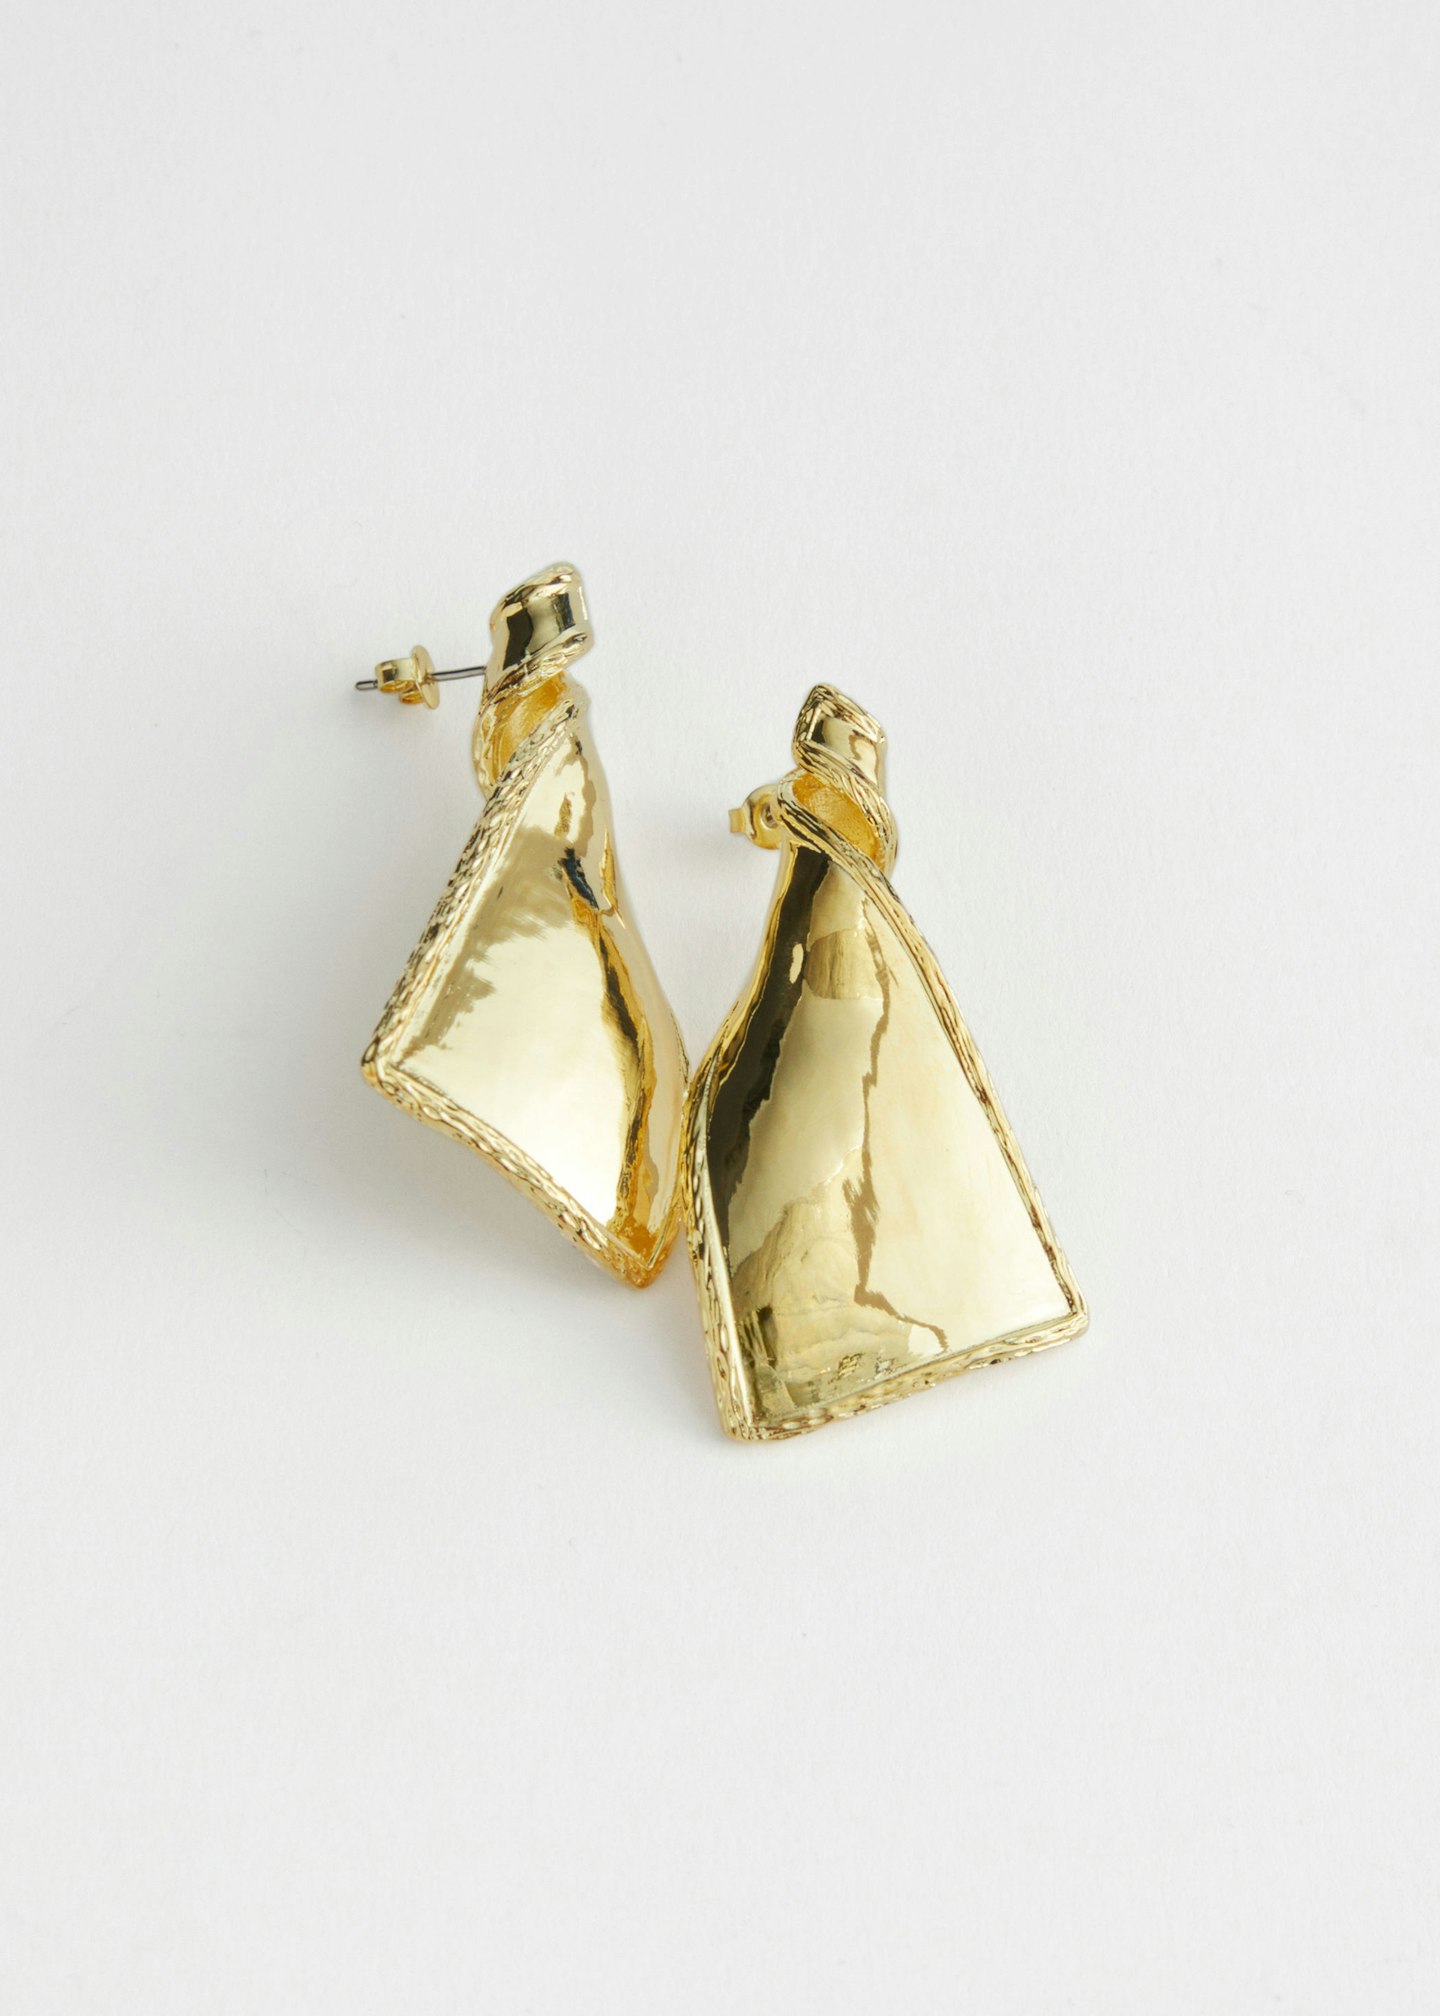 & Other Stories, Twisted Pendant Earrings, £27